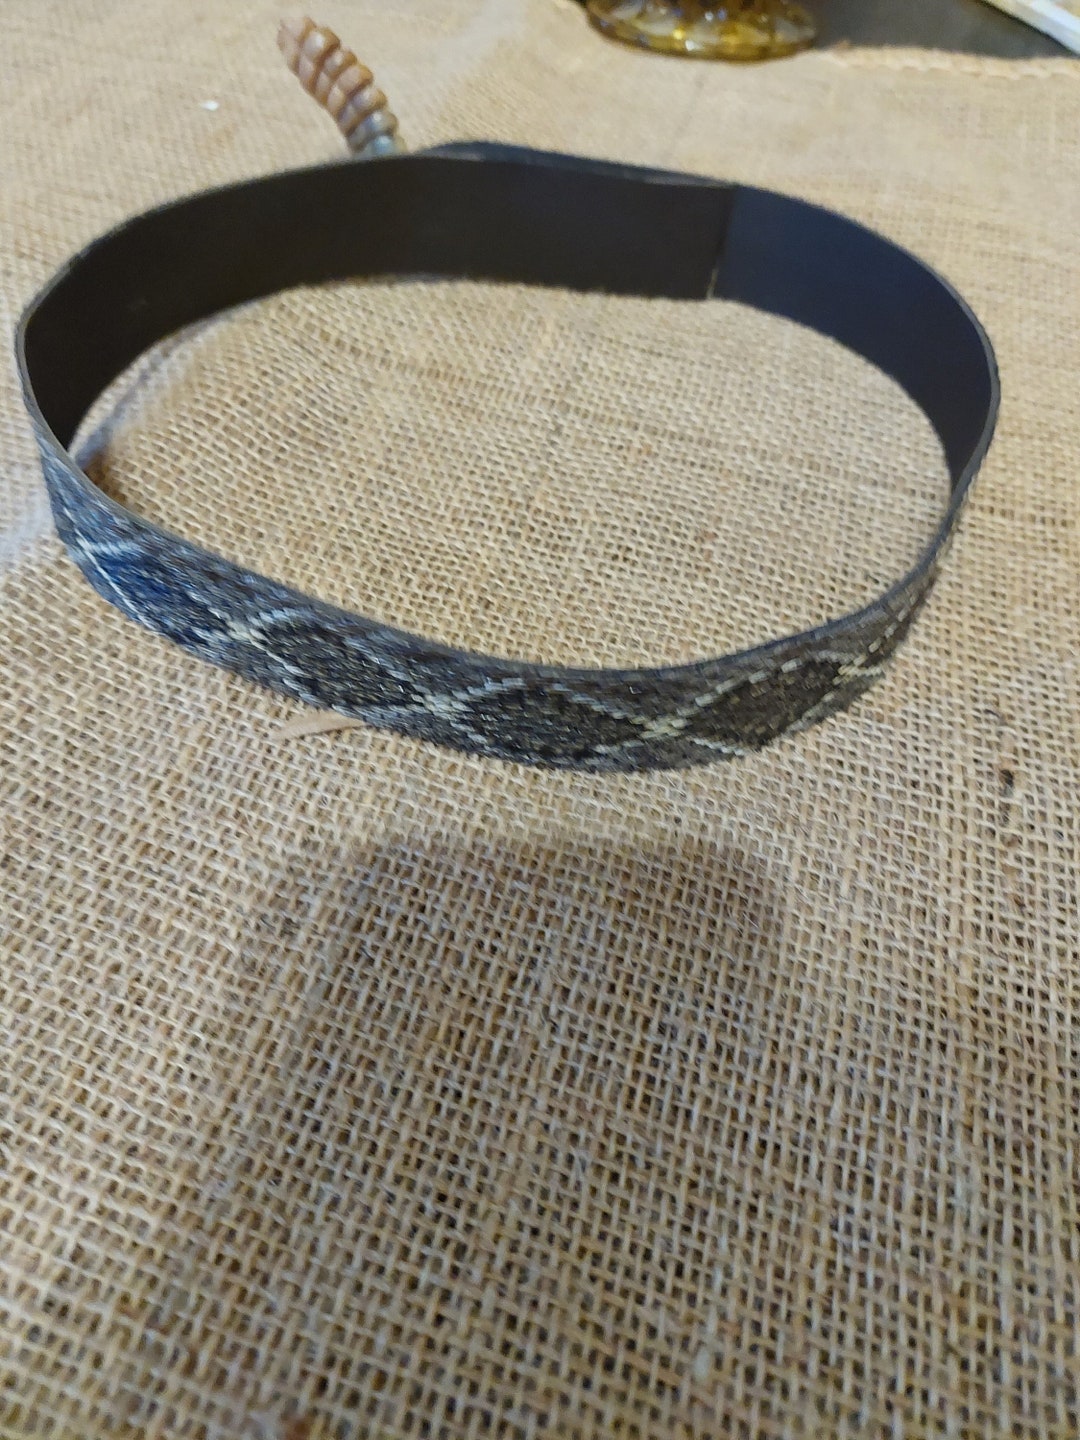 1.25 Rattlesnake Skin Hat Band With Real Cowhide Backing - Etsy